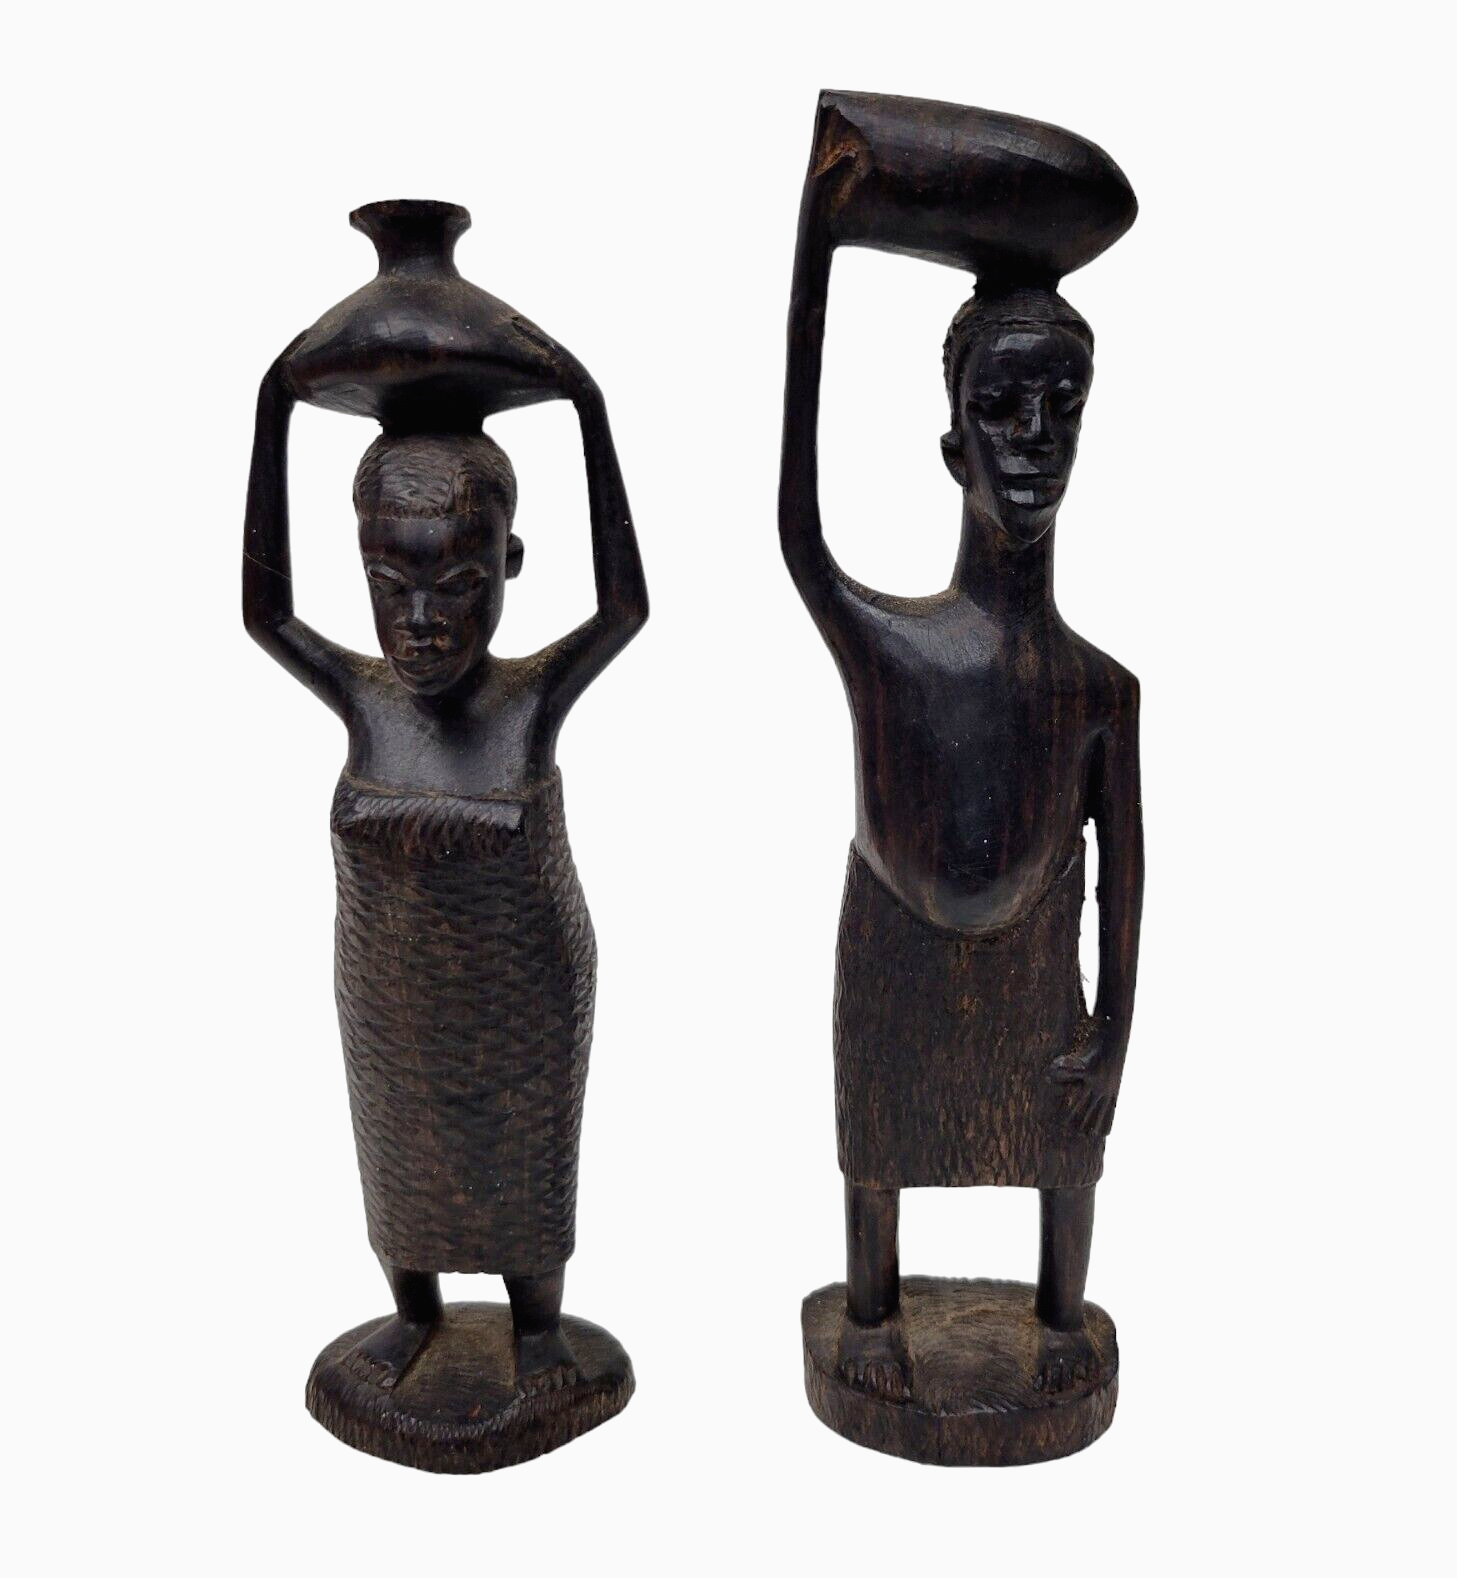 Primary image for Ebony Wood African Tribal Figures Hand Carved Man & Woman 7" Set of 2